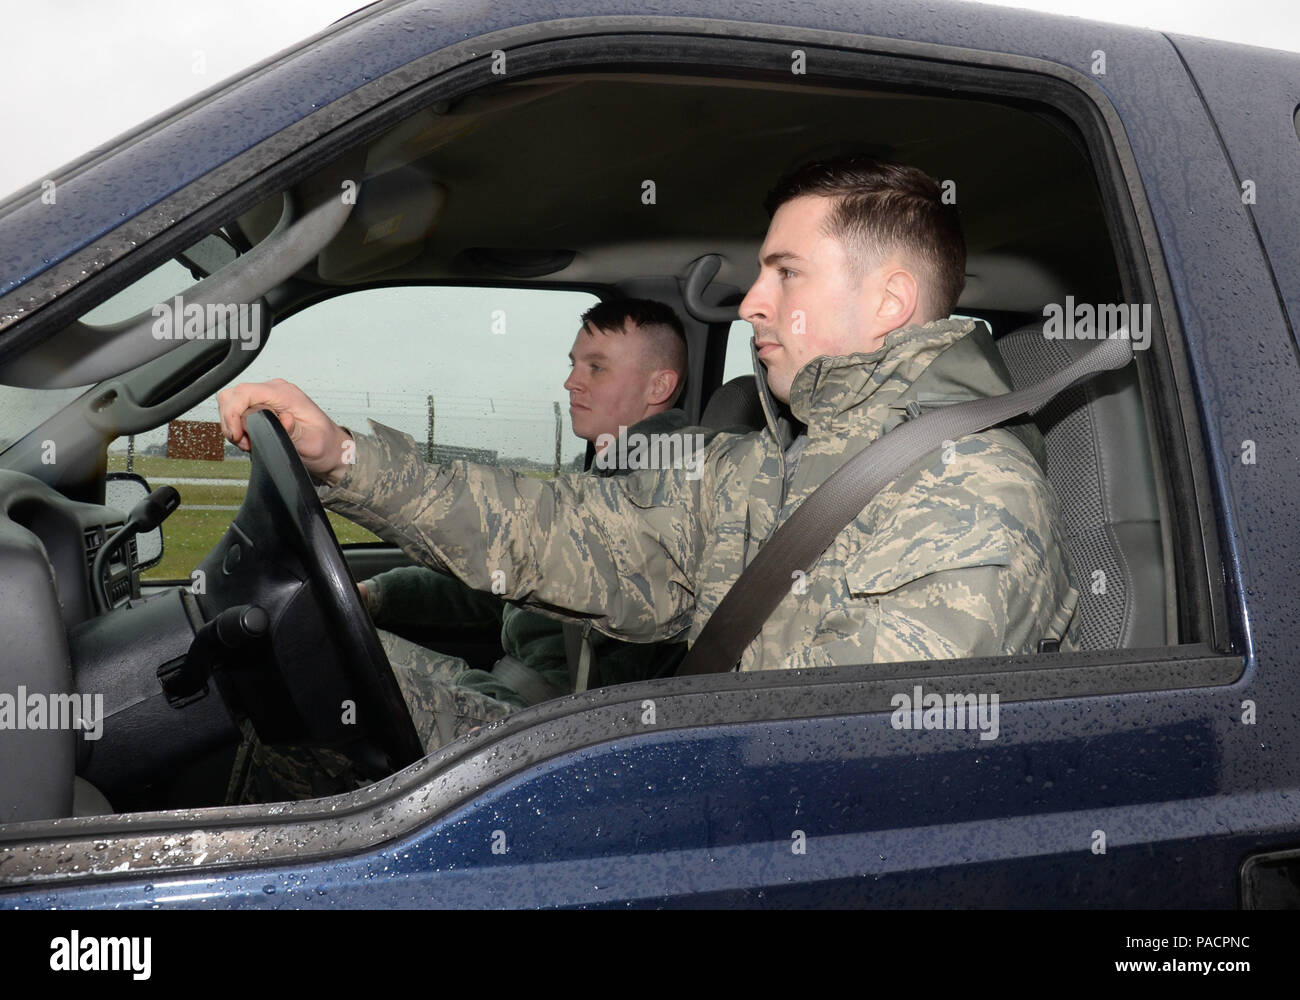 U.S. Air Force Airman 1st Class George Palmer, left, 100th Logistics Readiness Squadron mobile distribution operator, and U.S. Air Force Staff Sgt. Dakota Ferris, 100th LRS NCO in charge of fixed facilities, head to the fuels compound in a government-owned vehicle March 9, 2016, on RAF Mildenhall, England. Fuels facilities are inspected daily, and are spread out across the base. (U.S. Air Force photo by Gina Randall/Released) Stock Photo